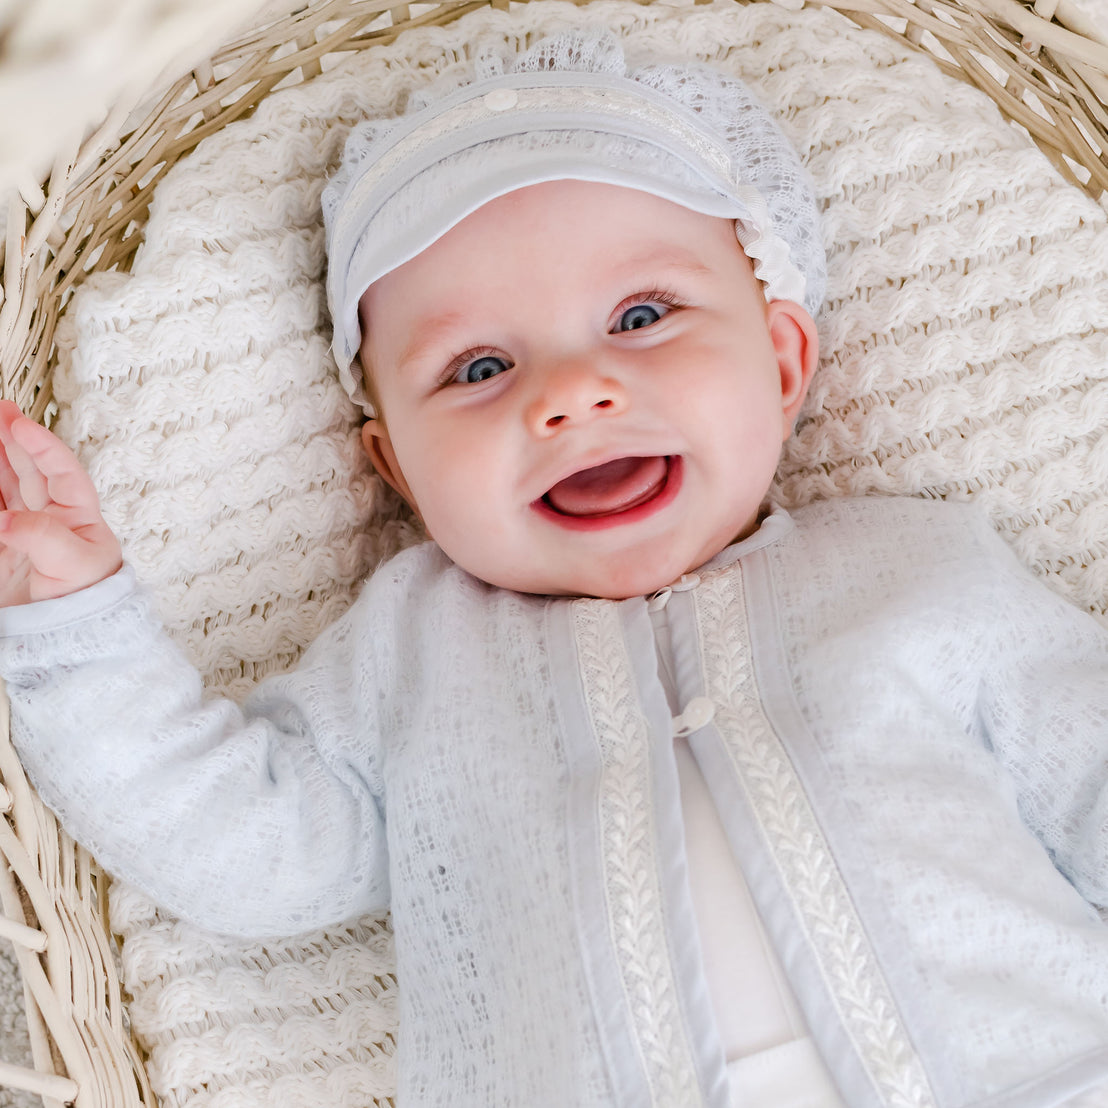 A baby in a crib smiles as he wears the Harrison Blue Knit Sweater and matching Blue Knit Hat